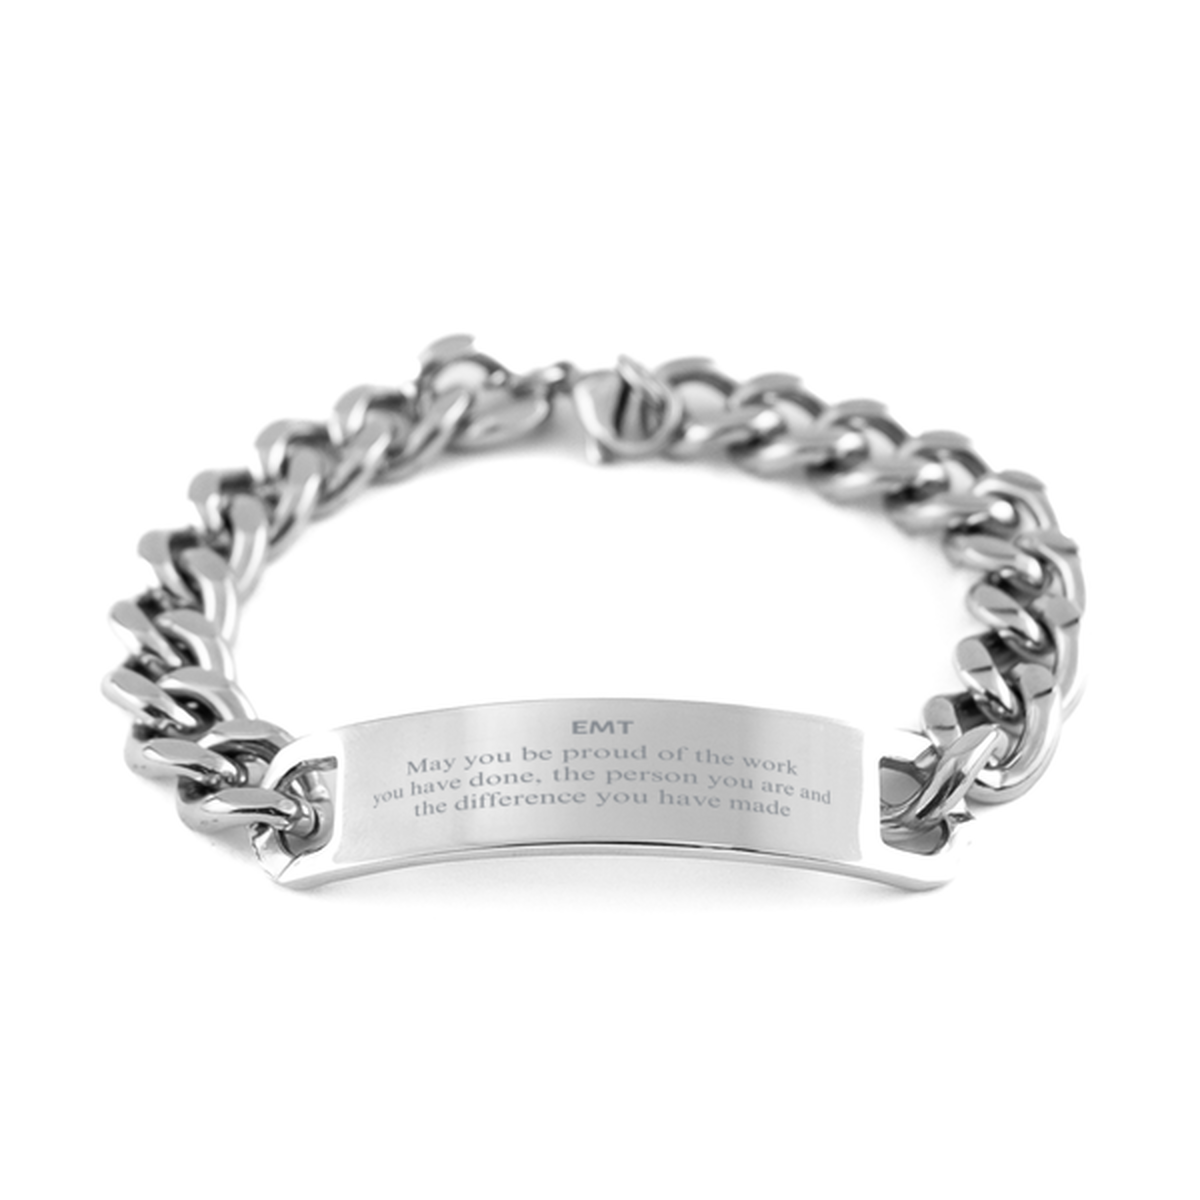 EMT May you be proud of the work you have done, Retirement EMT Cuban Chain Stainless Steel Bracelet for Colleague Appreciation Gifts Amazing for EMT